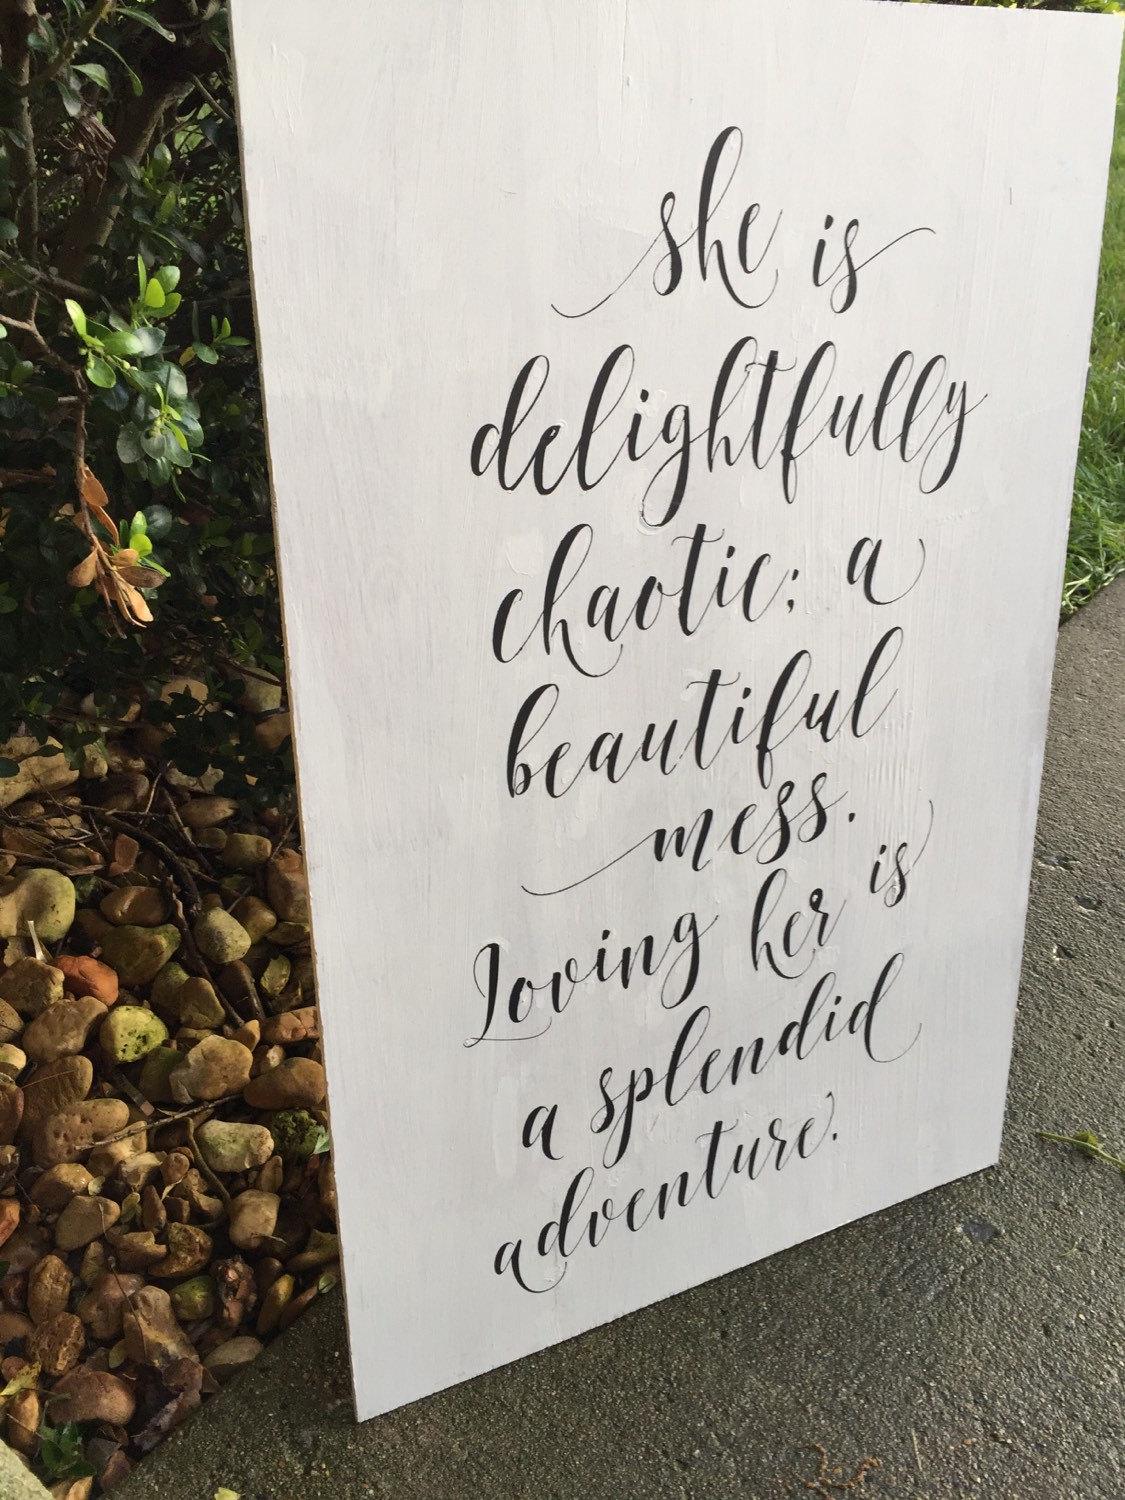 She Is Delightfully Chaotic; A Beautiful Mess. Loving Her Is A Splendid Adventure 17x26 Hand Painted Sign.